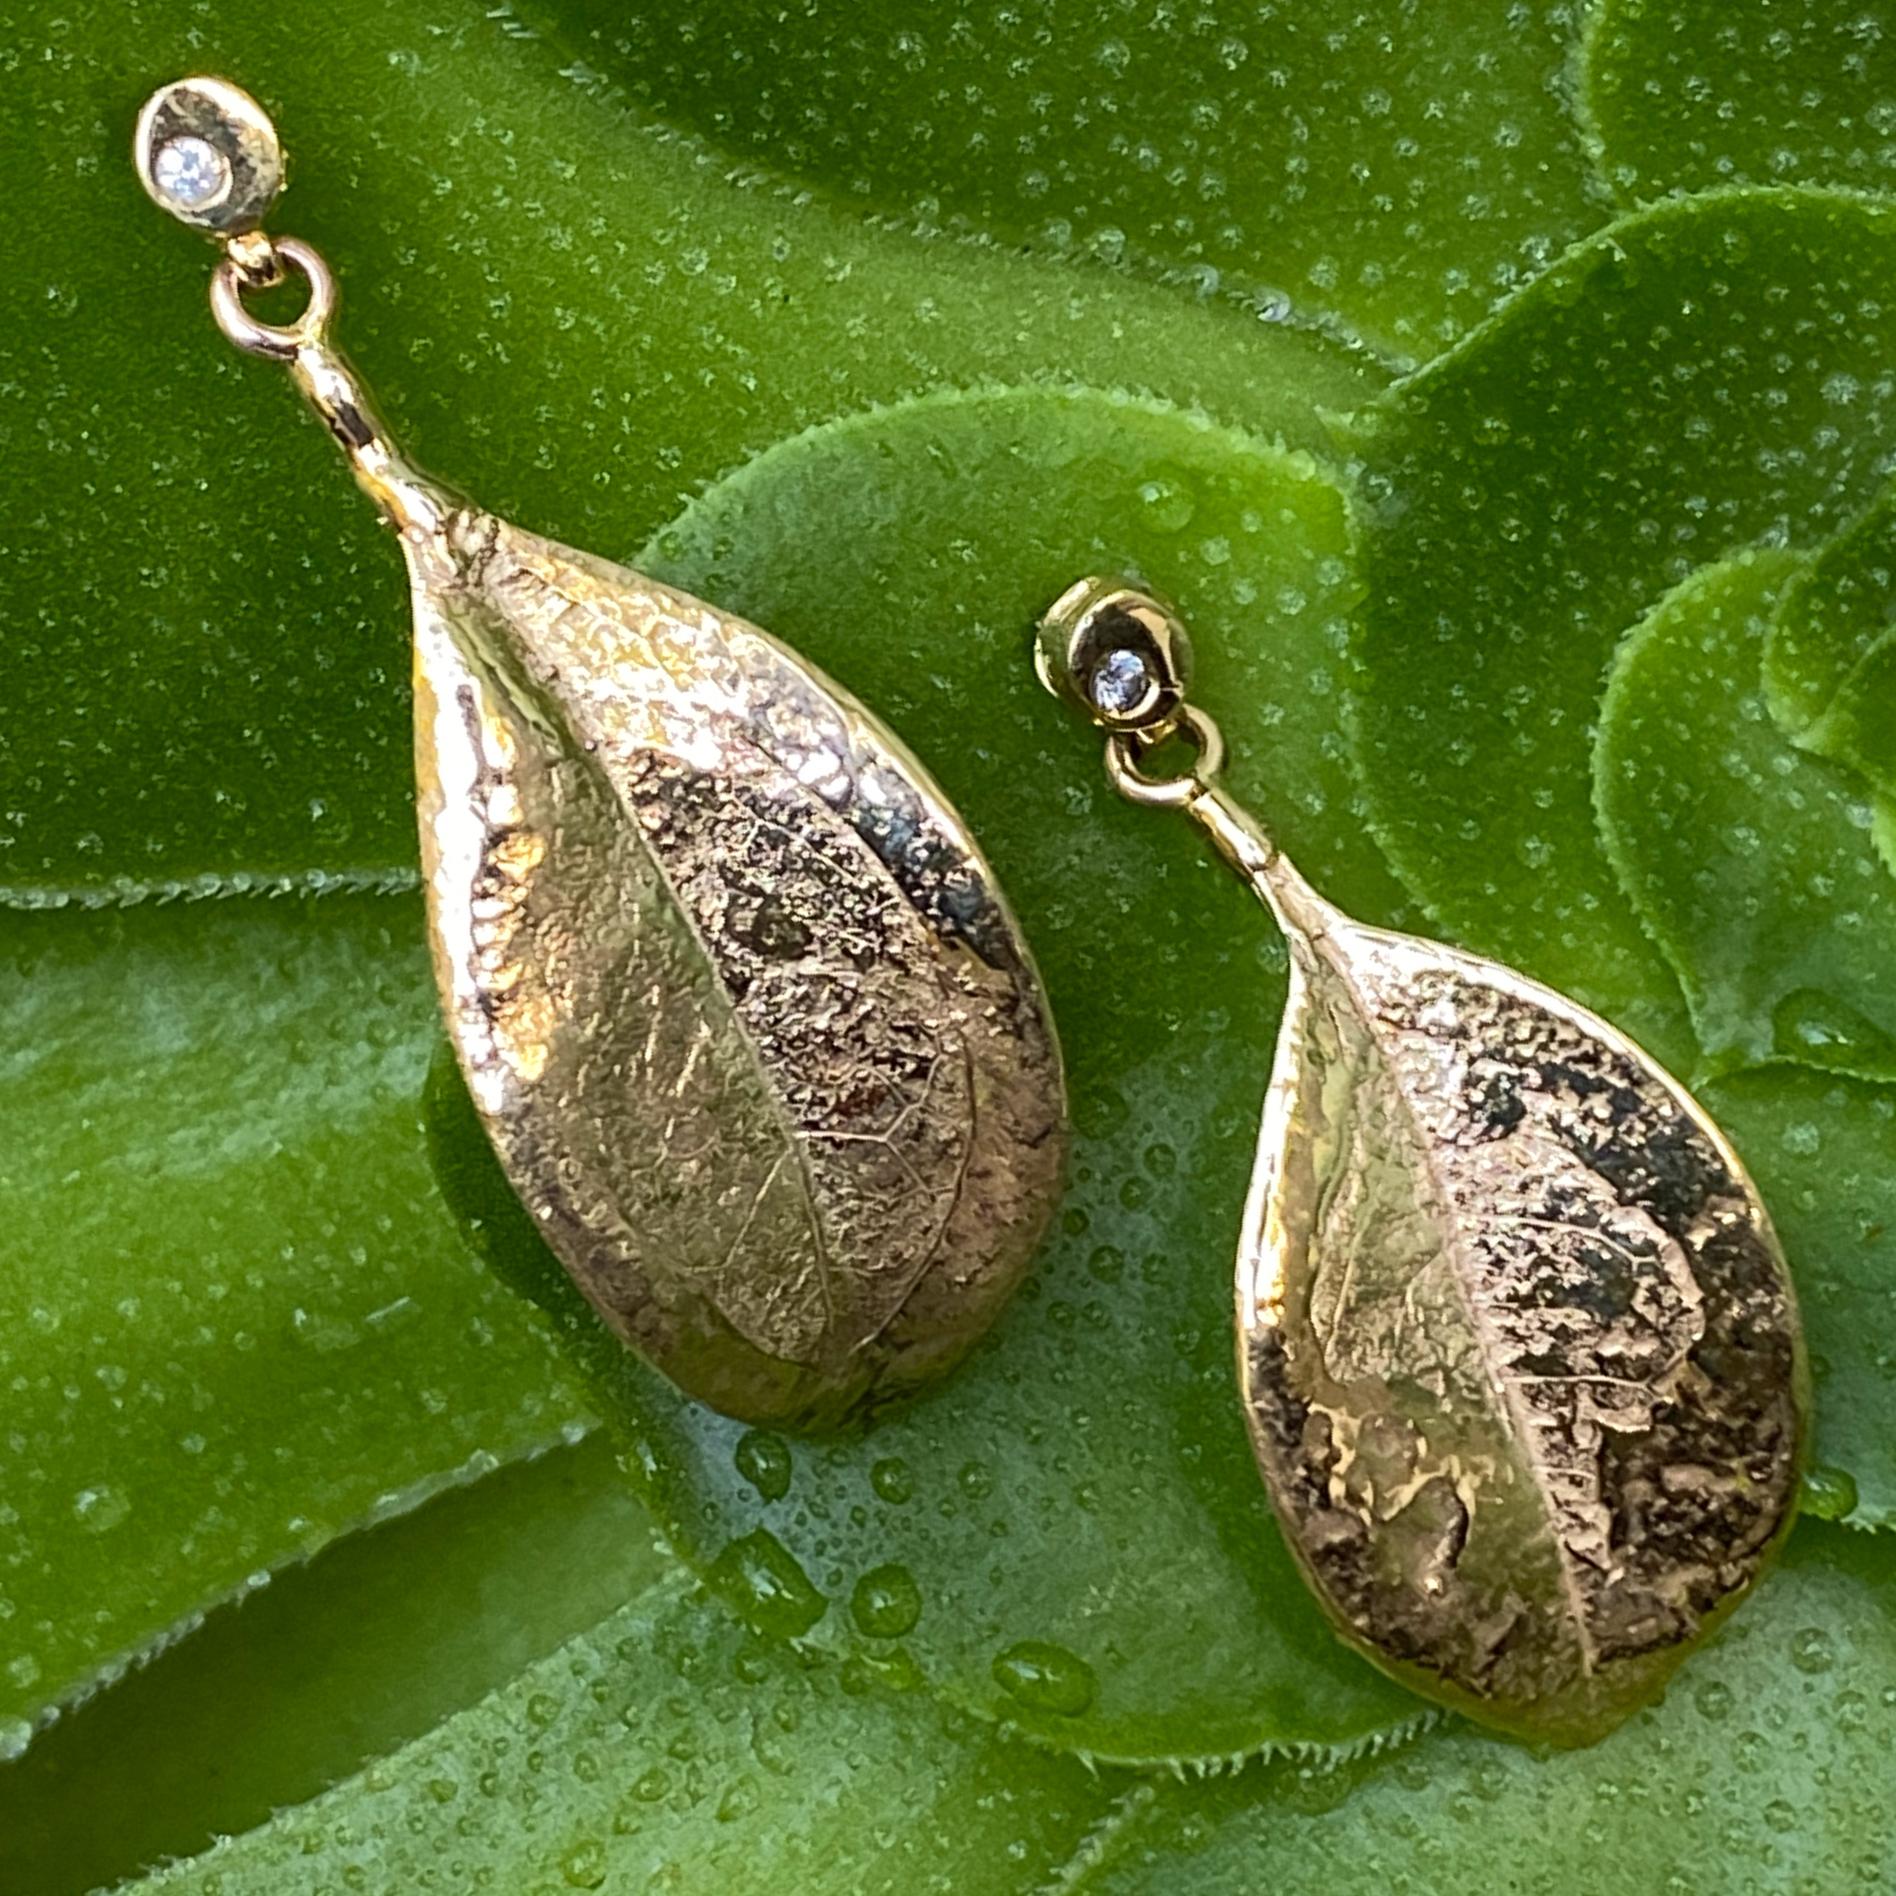 These lightweight, light-loving earrings are cast from actual leaves and, as such, they are whisper thin and bear the same natural texture.  They are 14K yellow gold, but have been flash-dipped in 18 karat gold, which gives them uneven splashes of